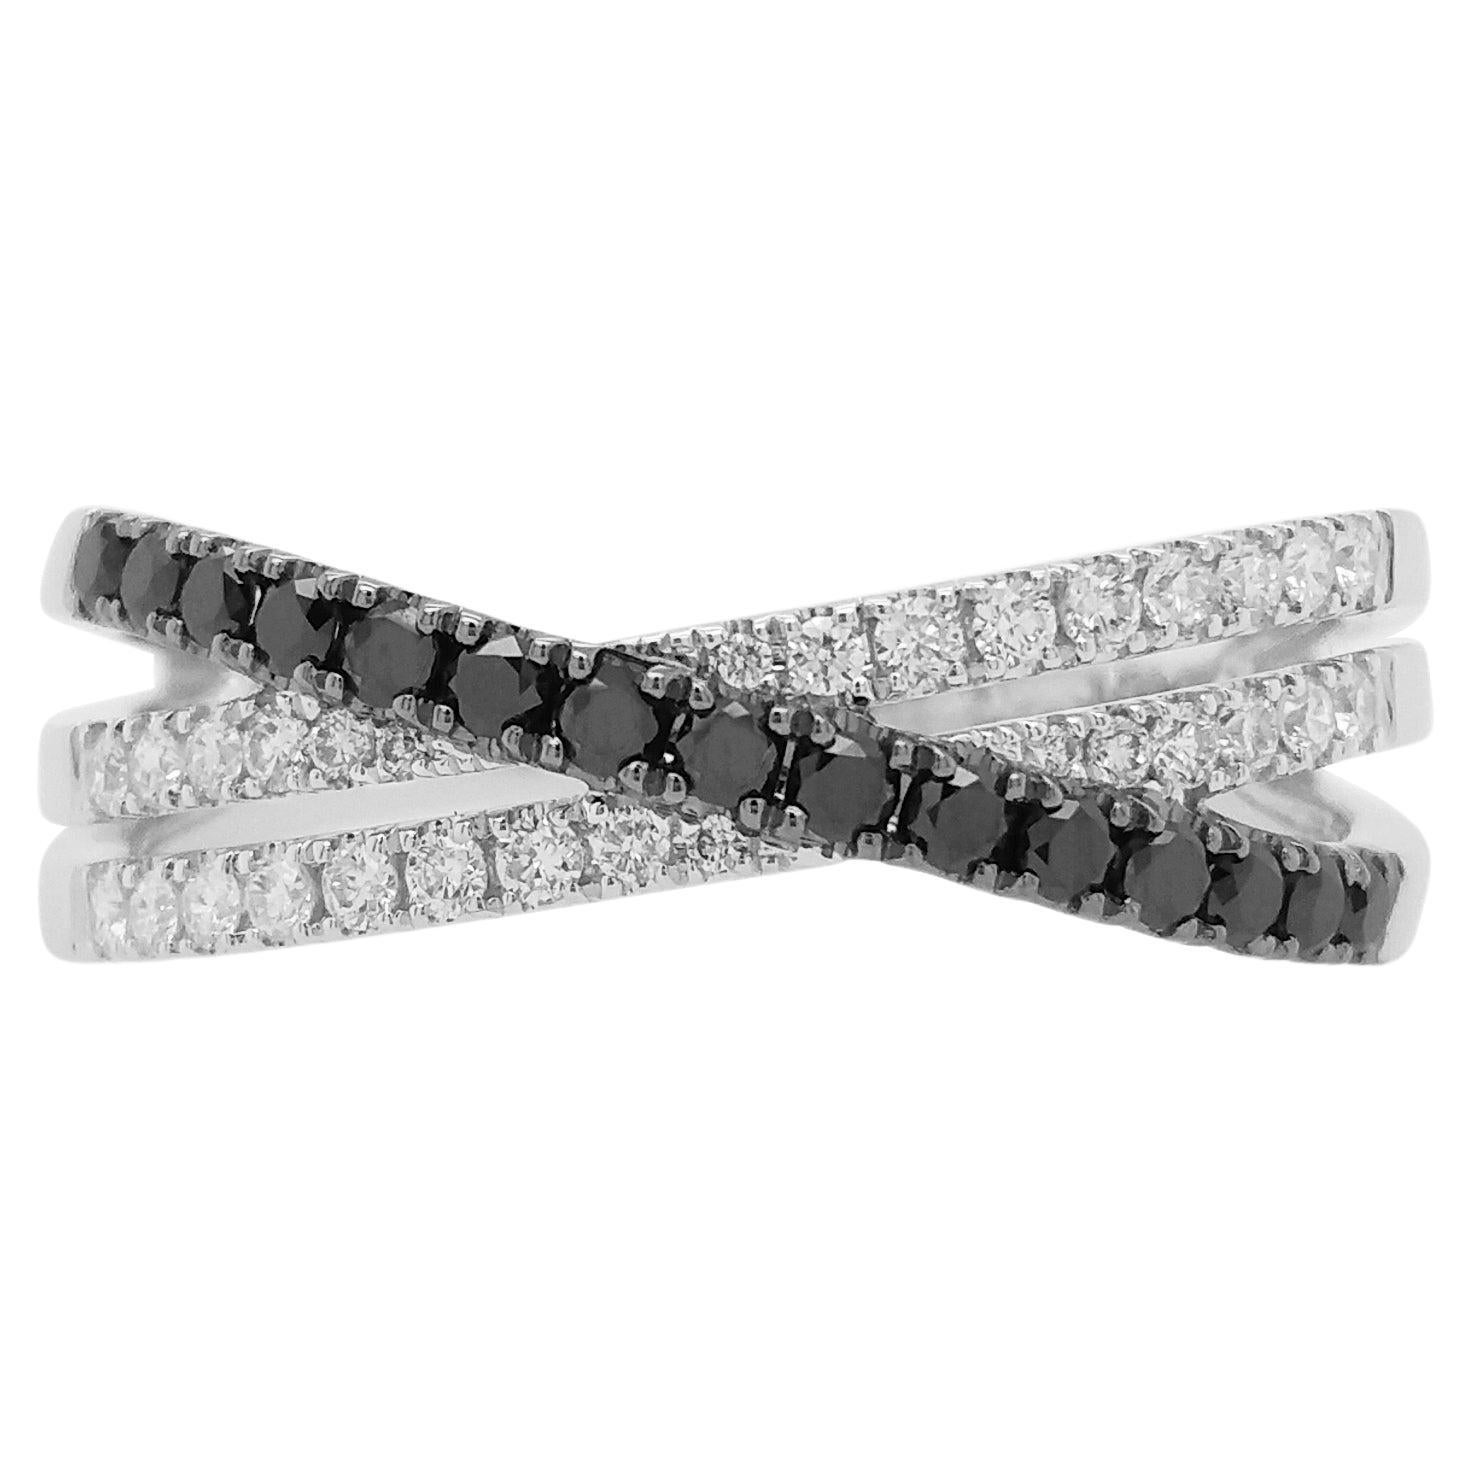 Modern Band Ring in Black Diamonds and White diamonds made in 18K Gold